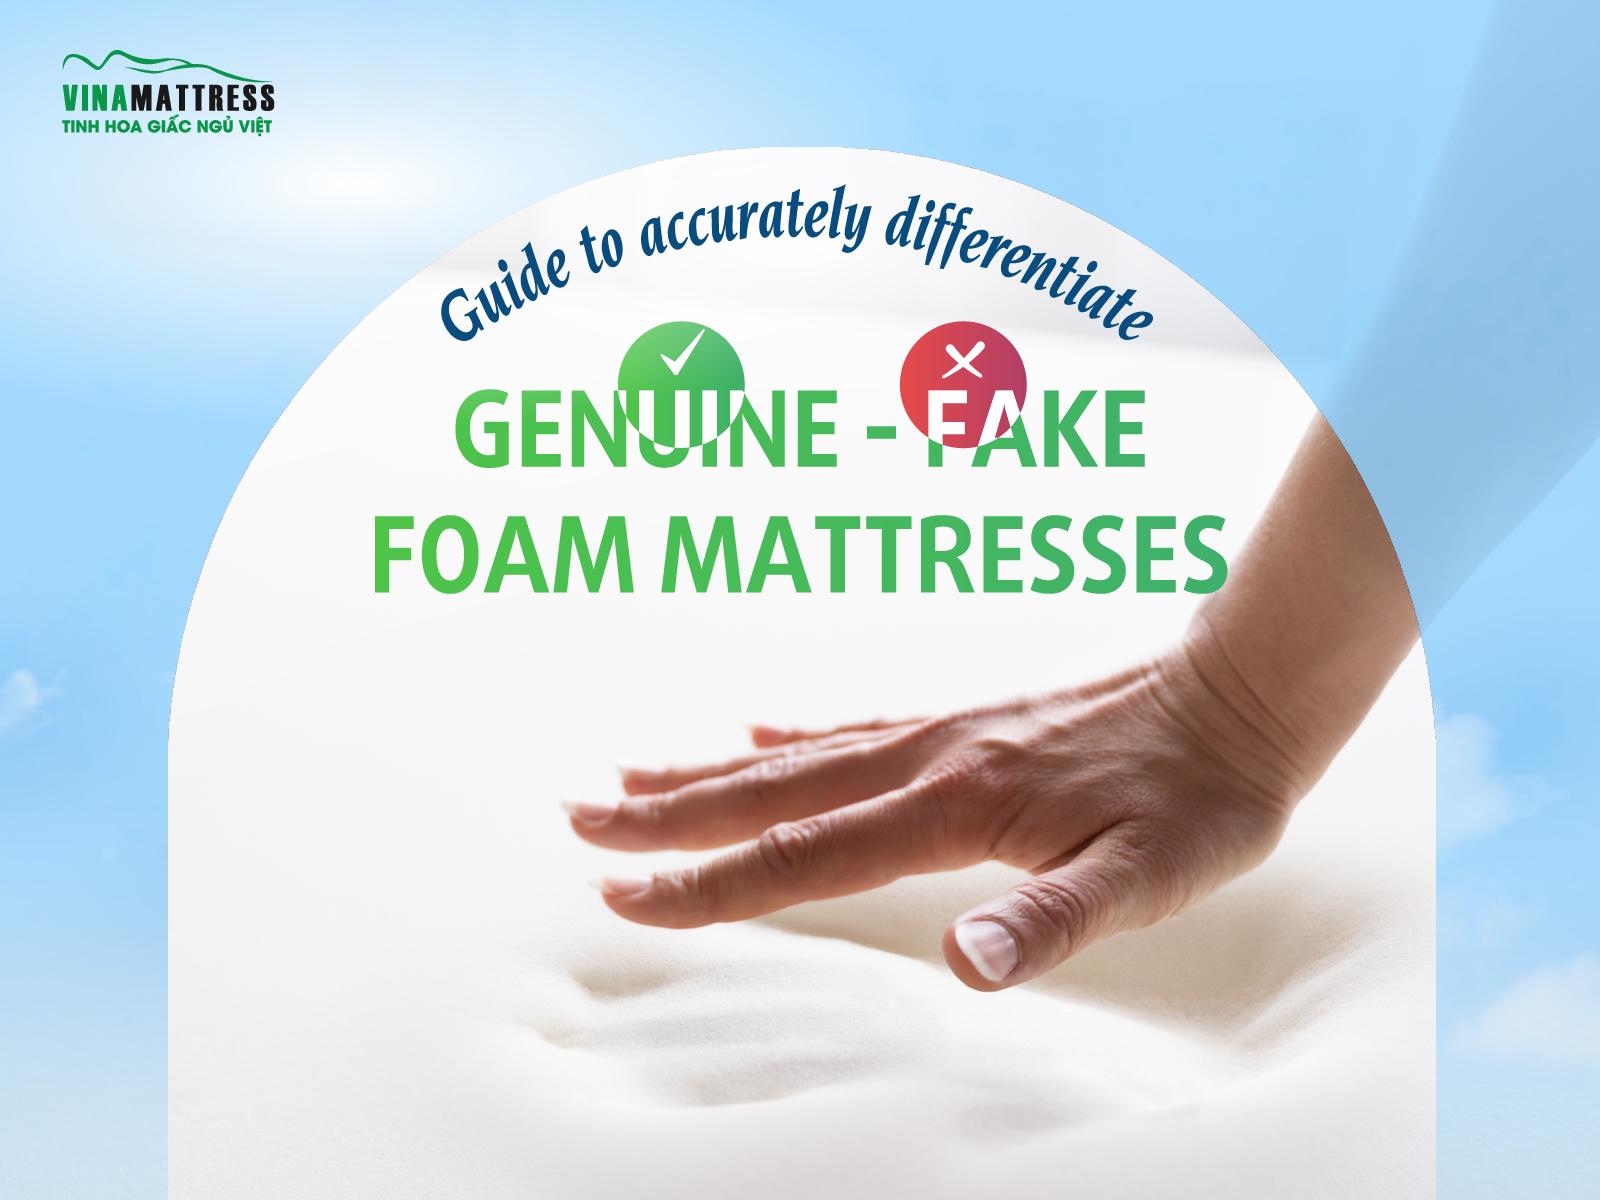 Guide to accurately differentiate genuine and fake foam mattresses